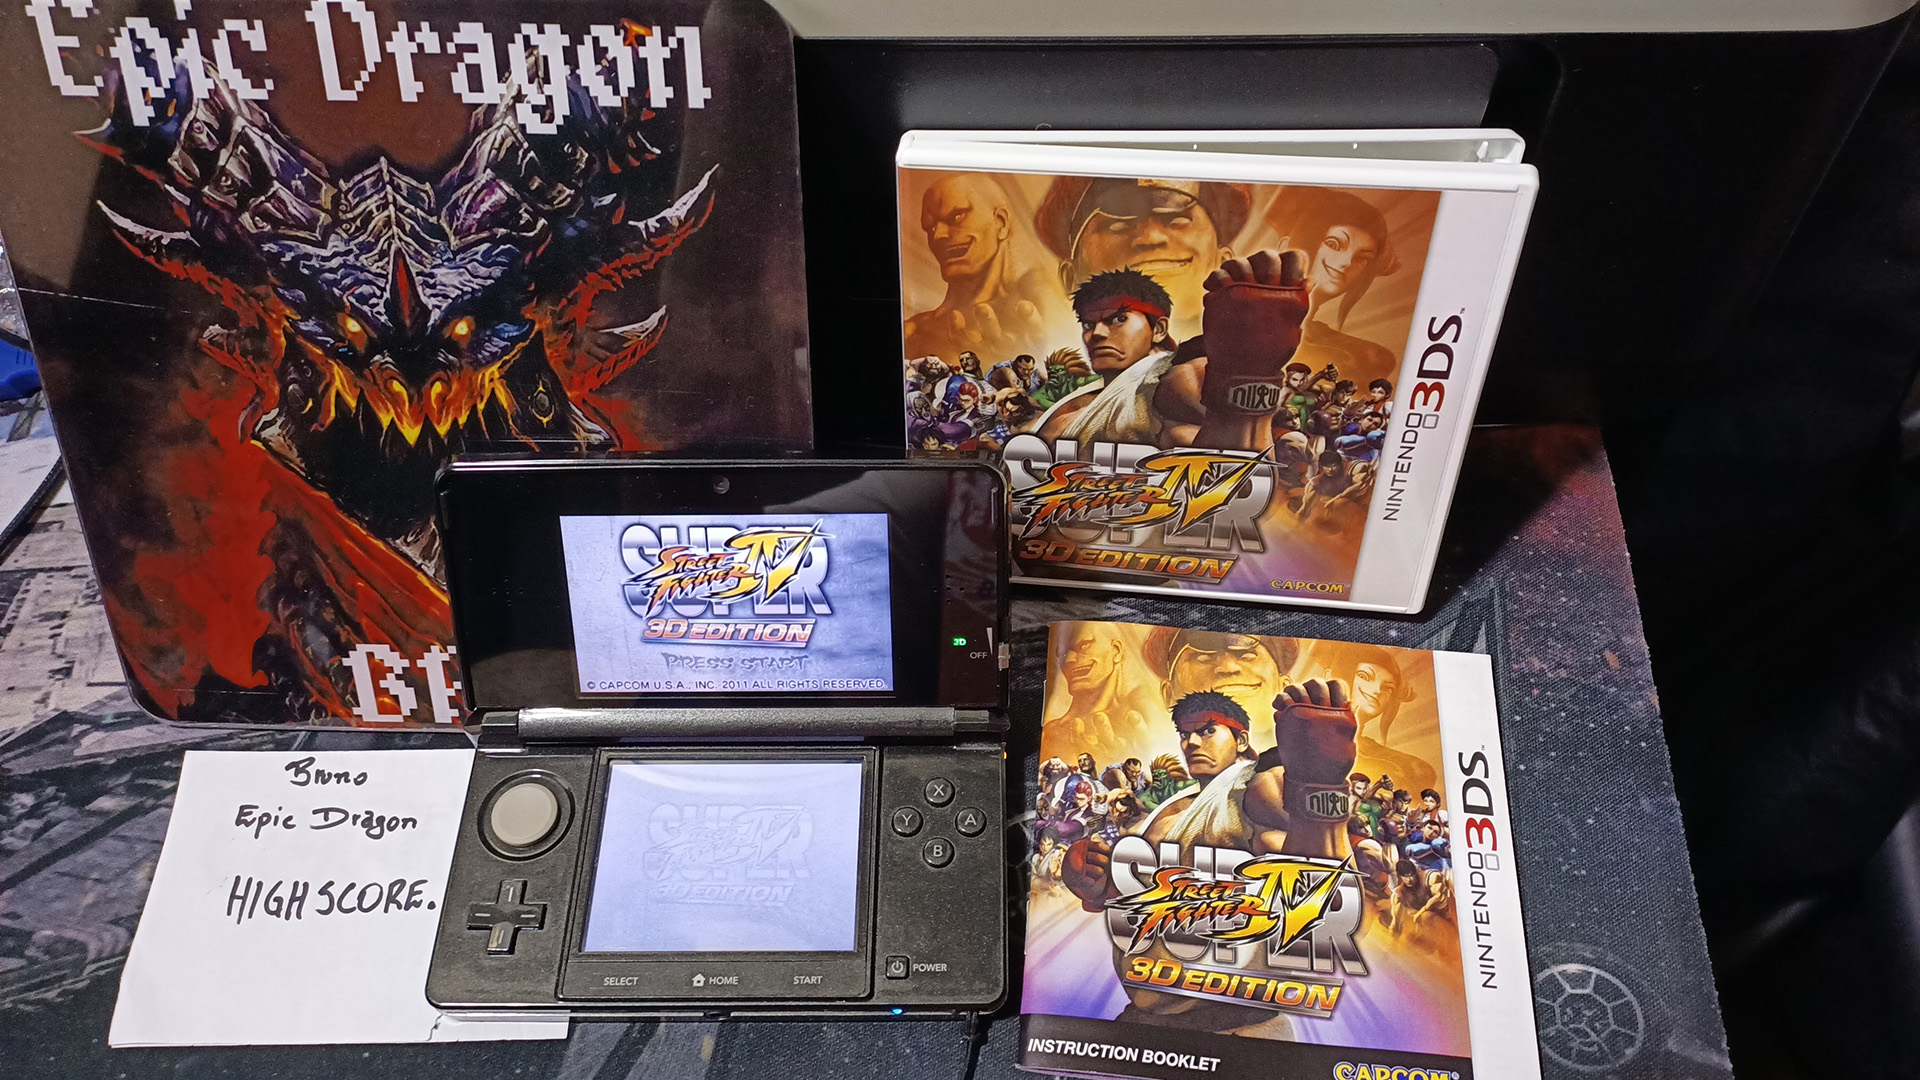 EpicDragon: Super Street Fighter IV 3D Edition: Arcade: Guy (Nintendo 3DS) 840,900 points on 2022-08-05 17:57:19